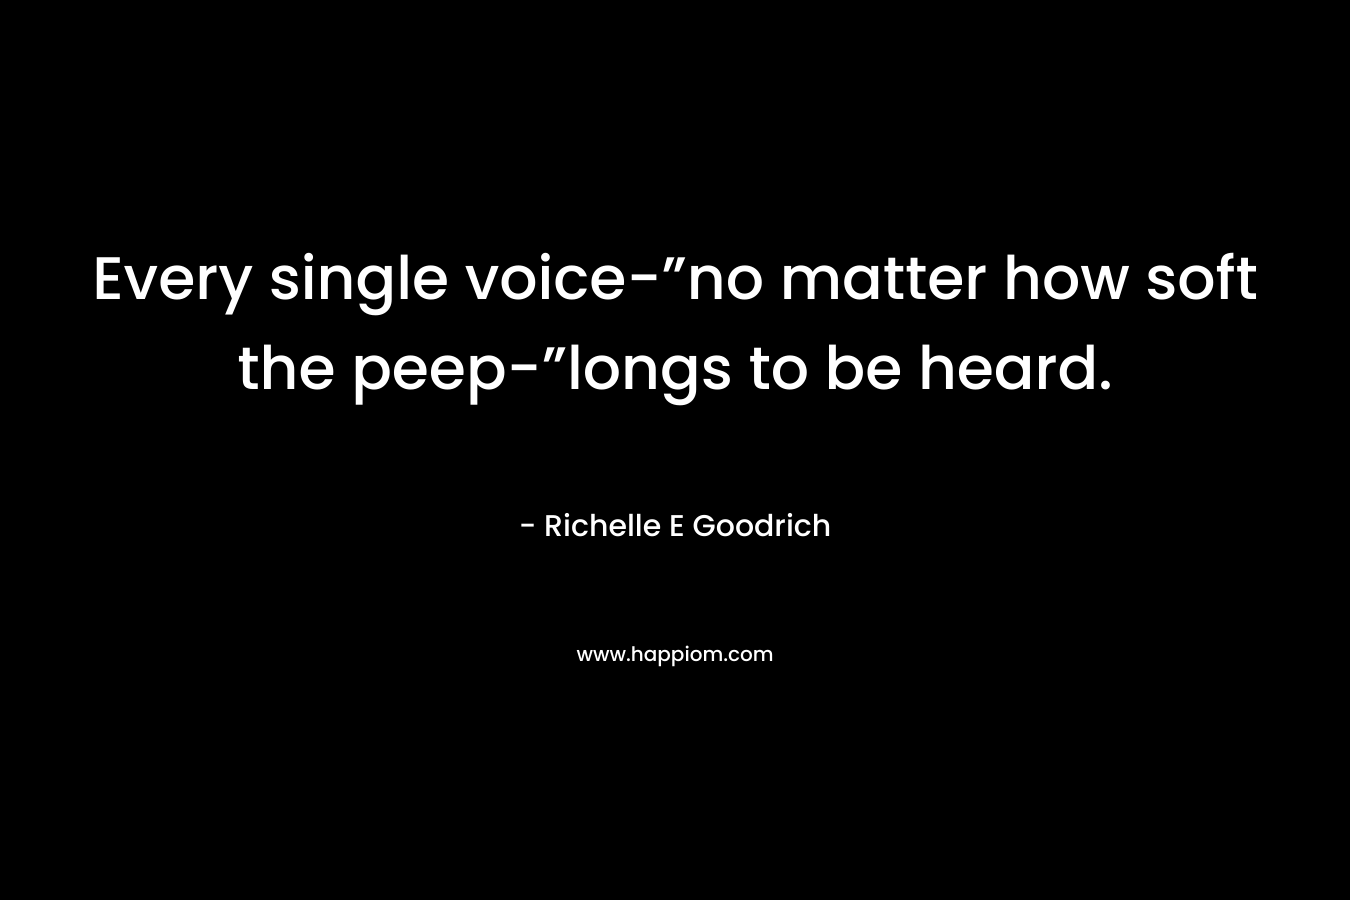 Every single voice-”no matter how soft the peep-”longs to be heard.